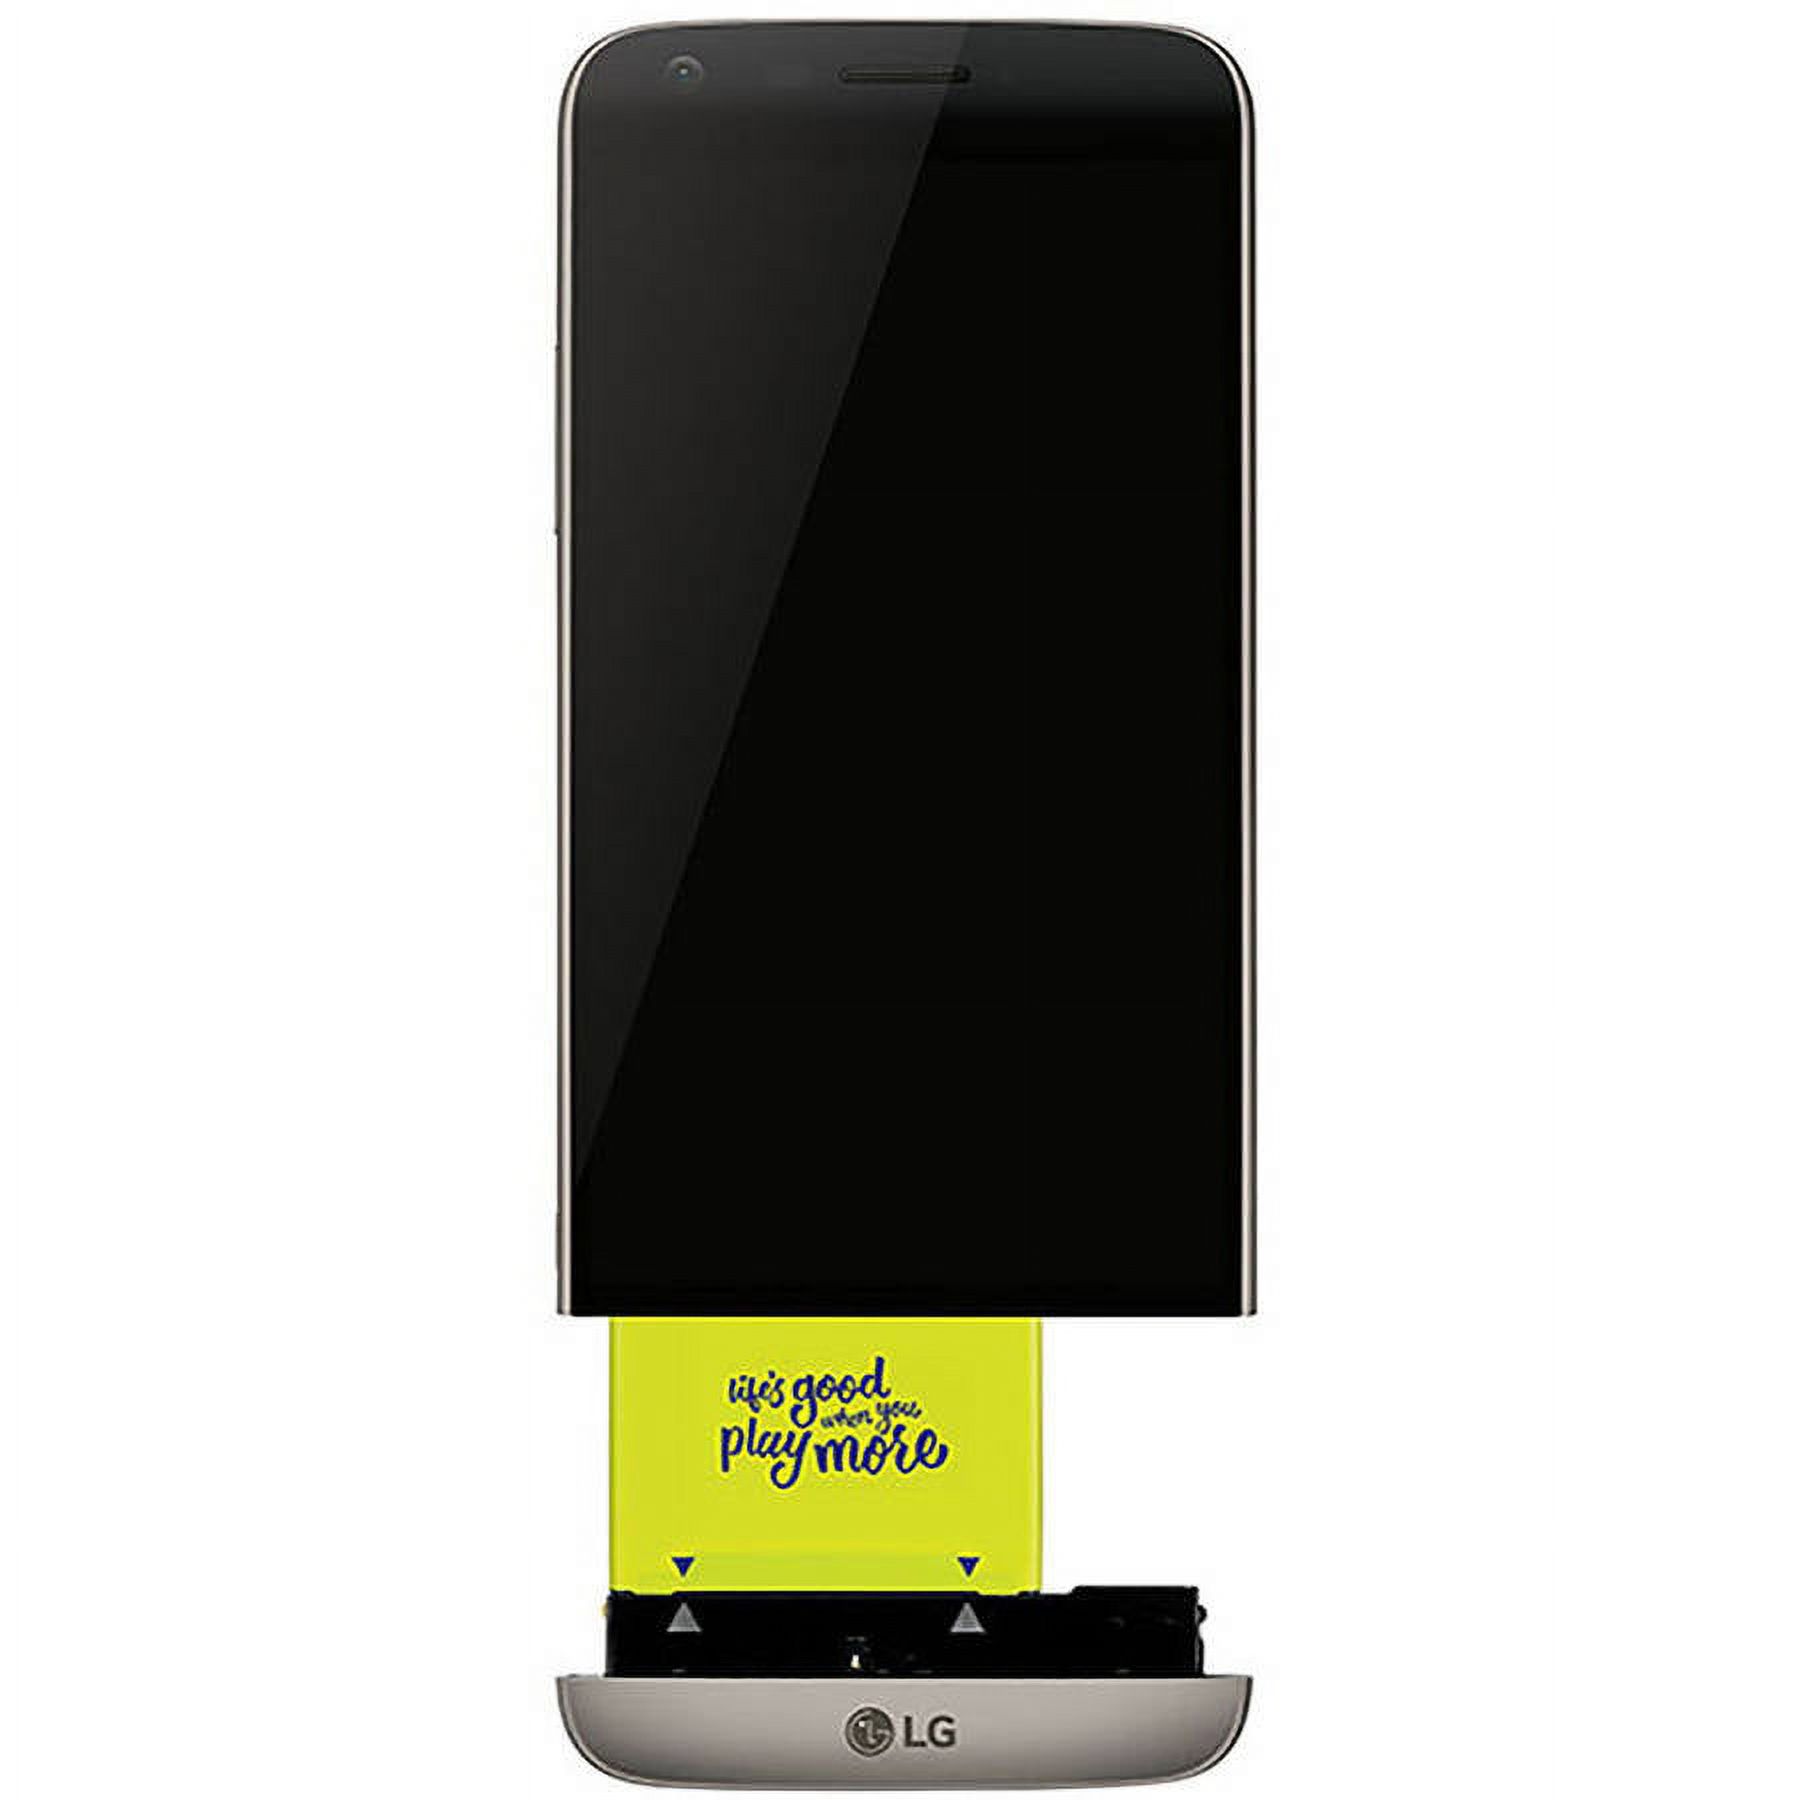 LG G5 RS988 32GB Unlocked GSM 4G LTE Quad-Core Android Phone w/ 16 MP Camera - Black - image 4 of 6